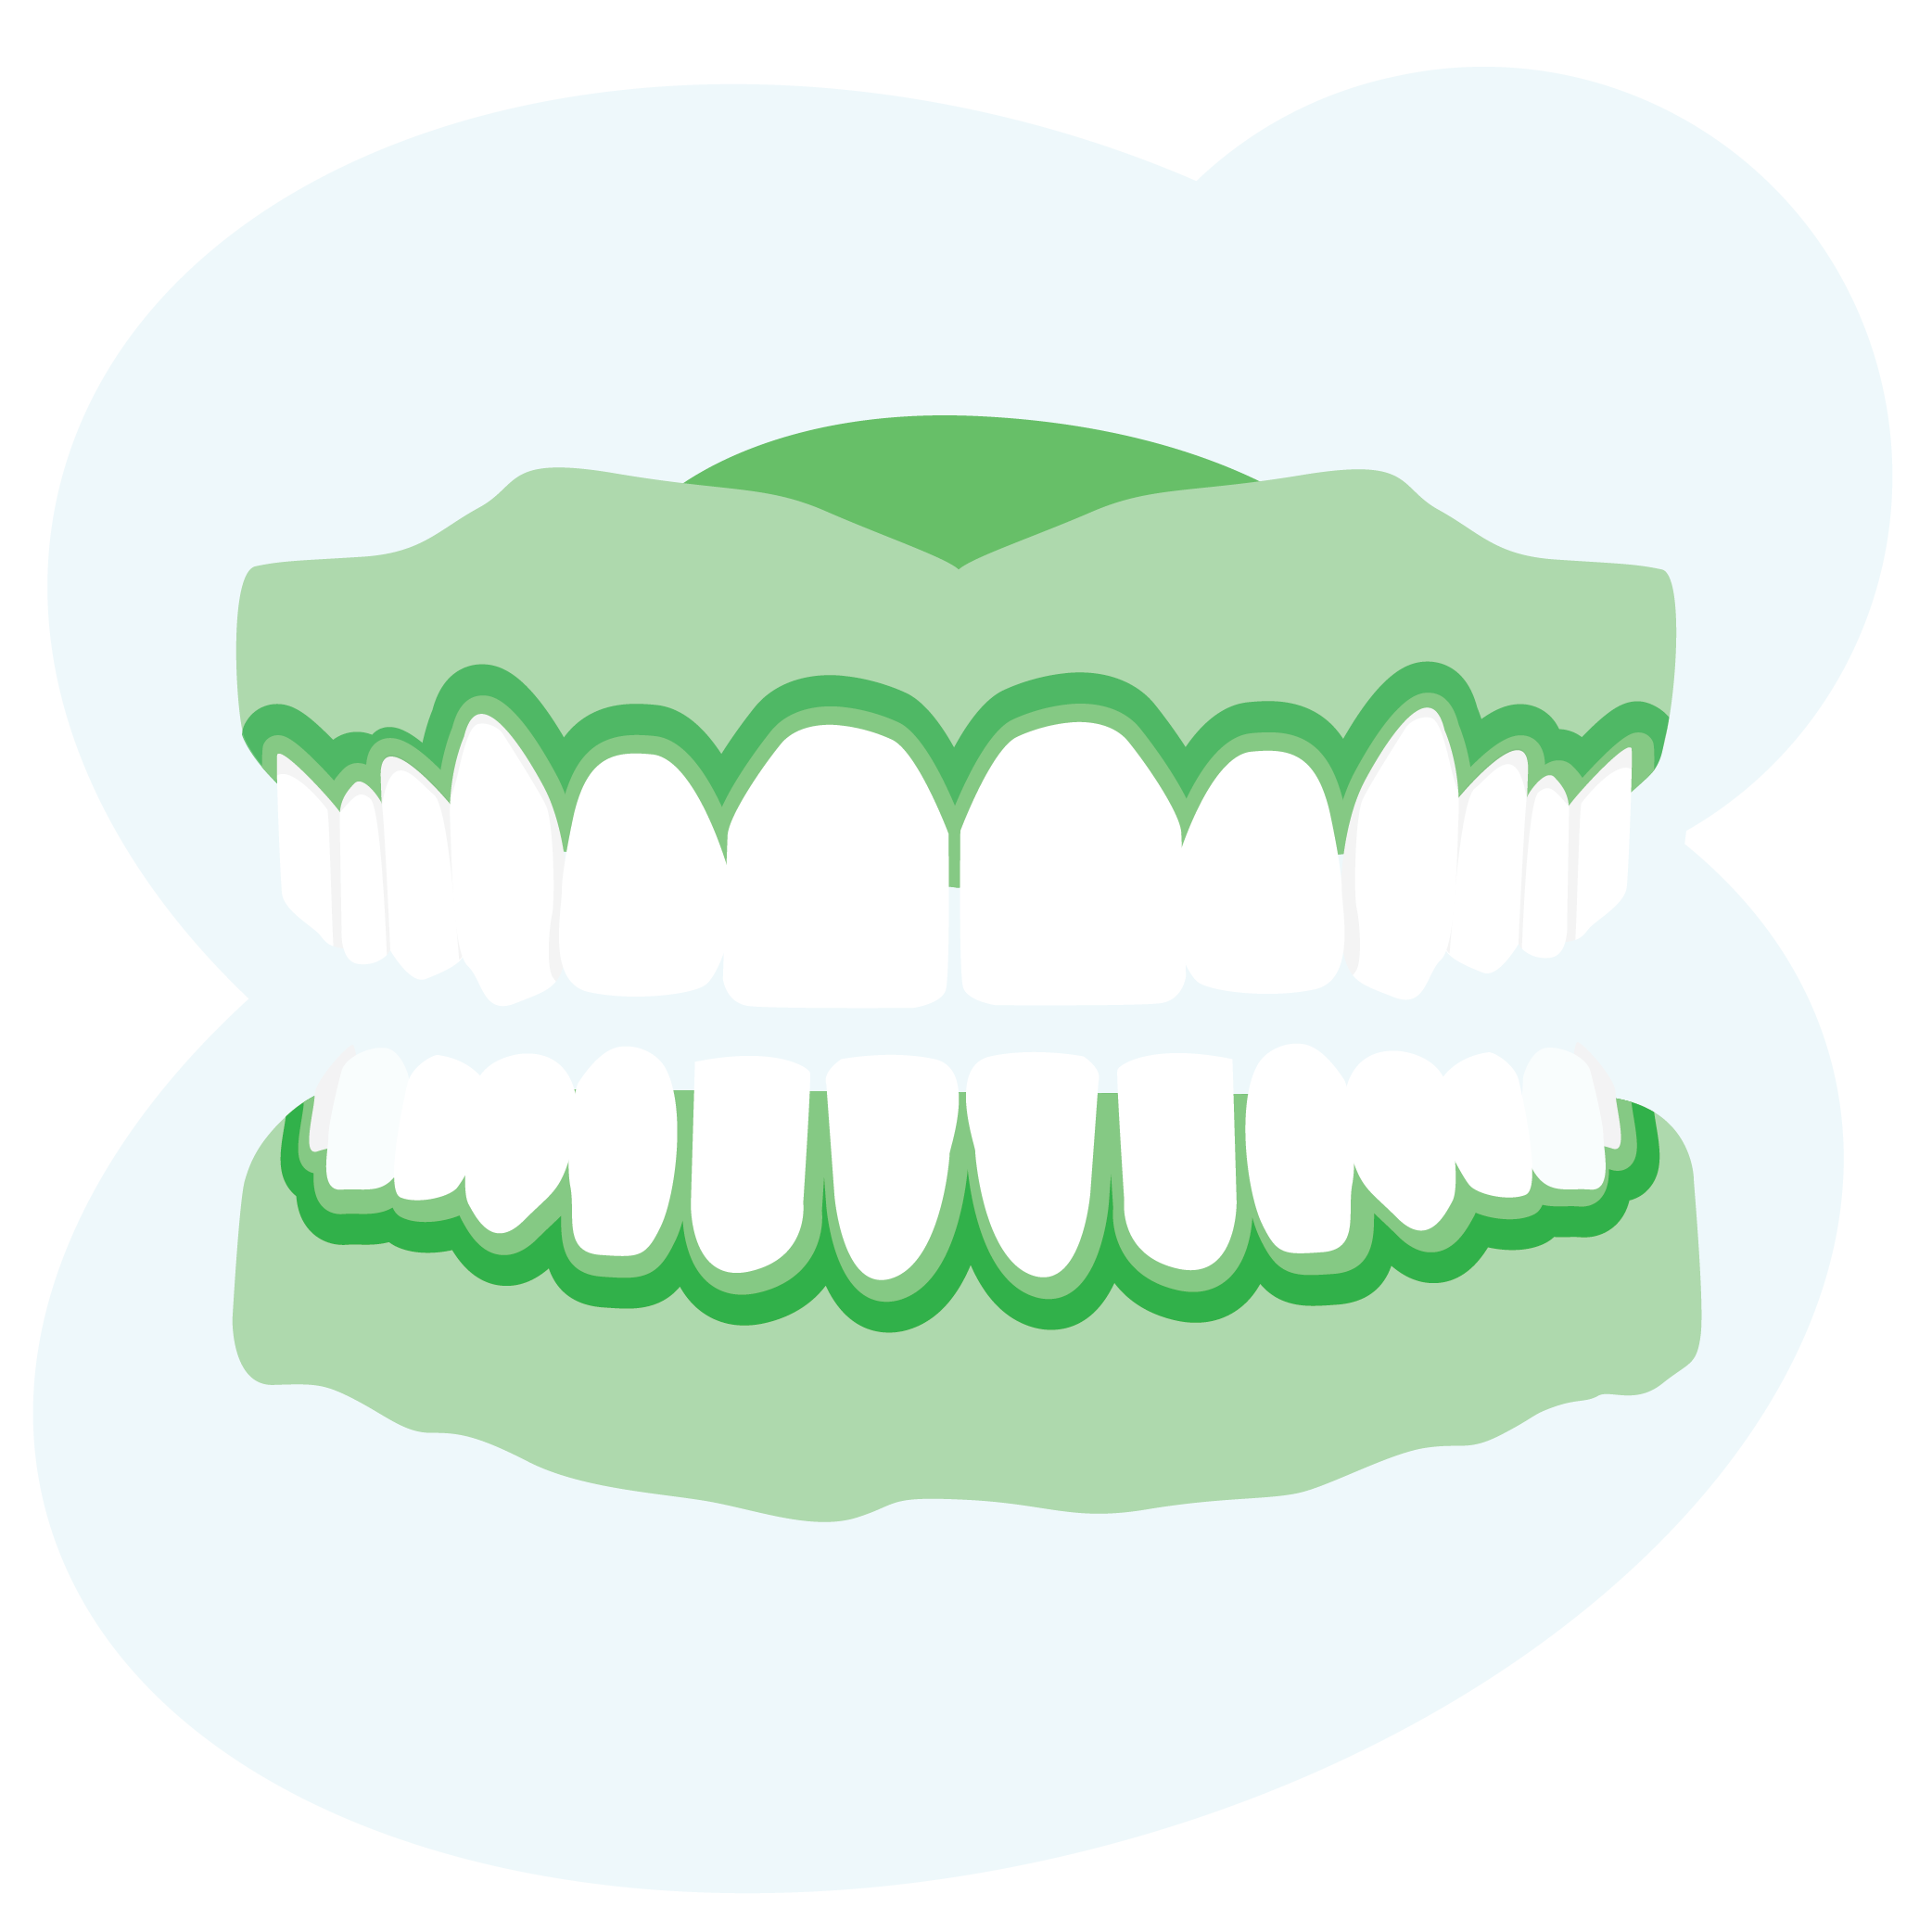 Illustration of a set of dentures, including top and bottom teeth